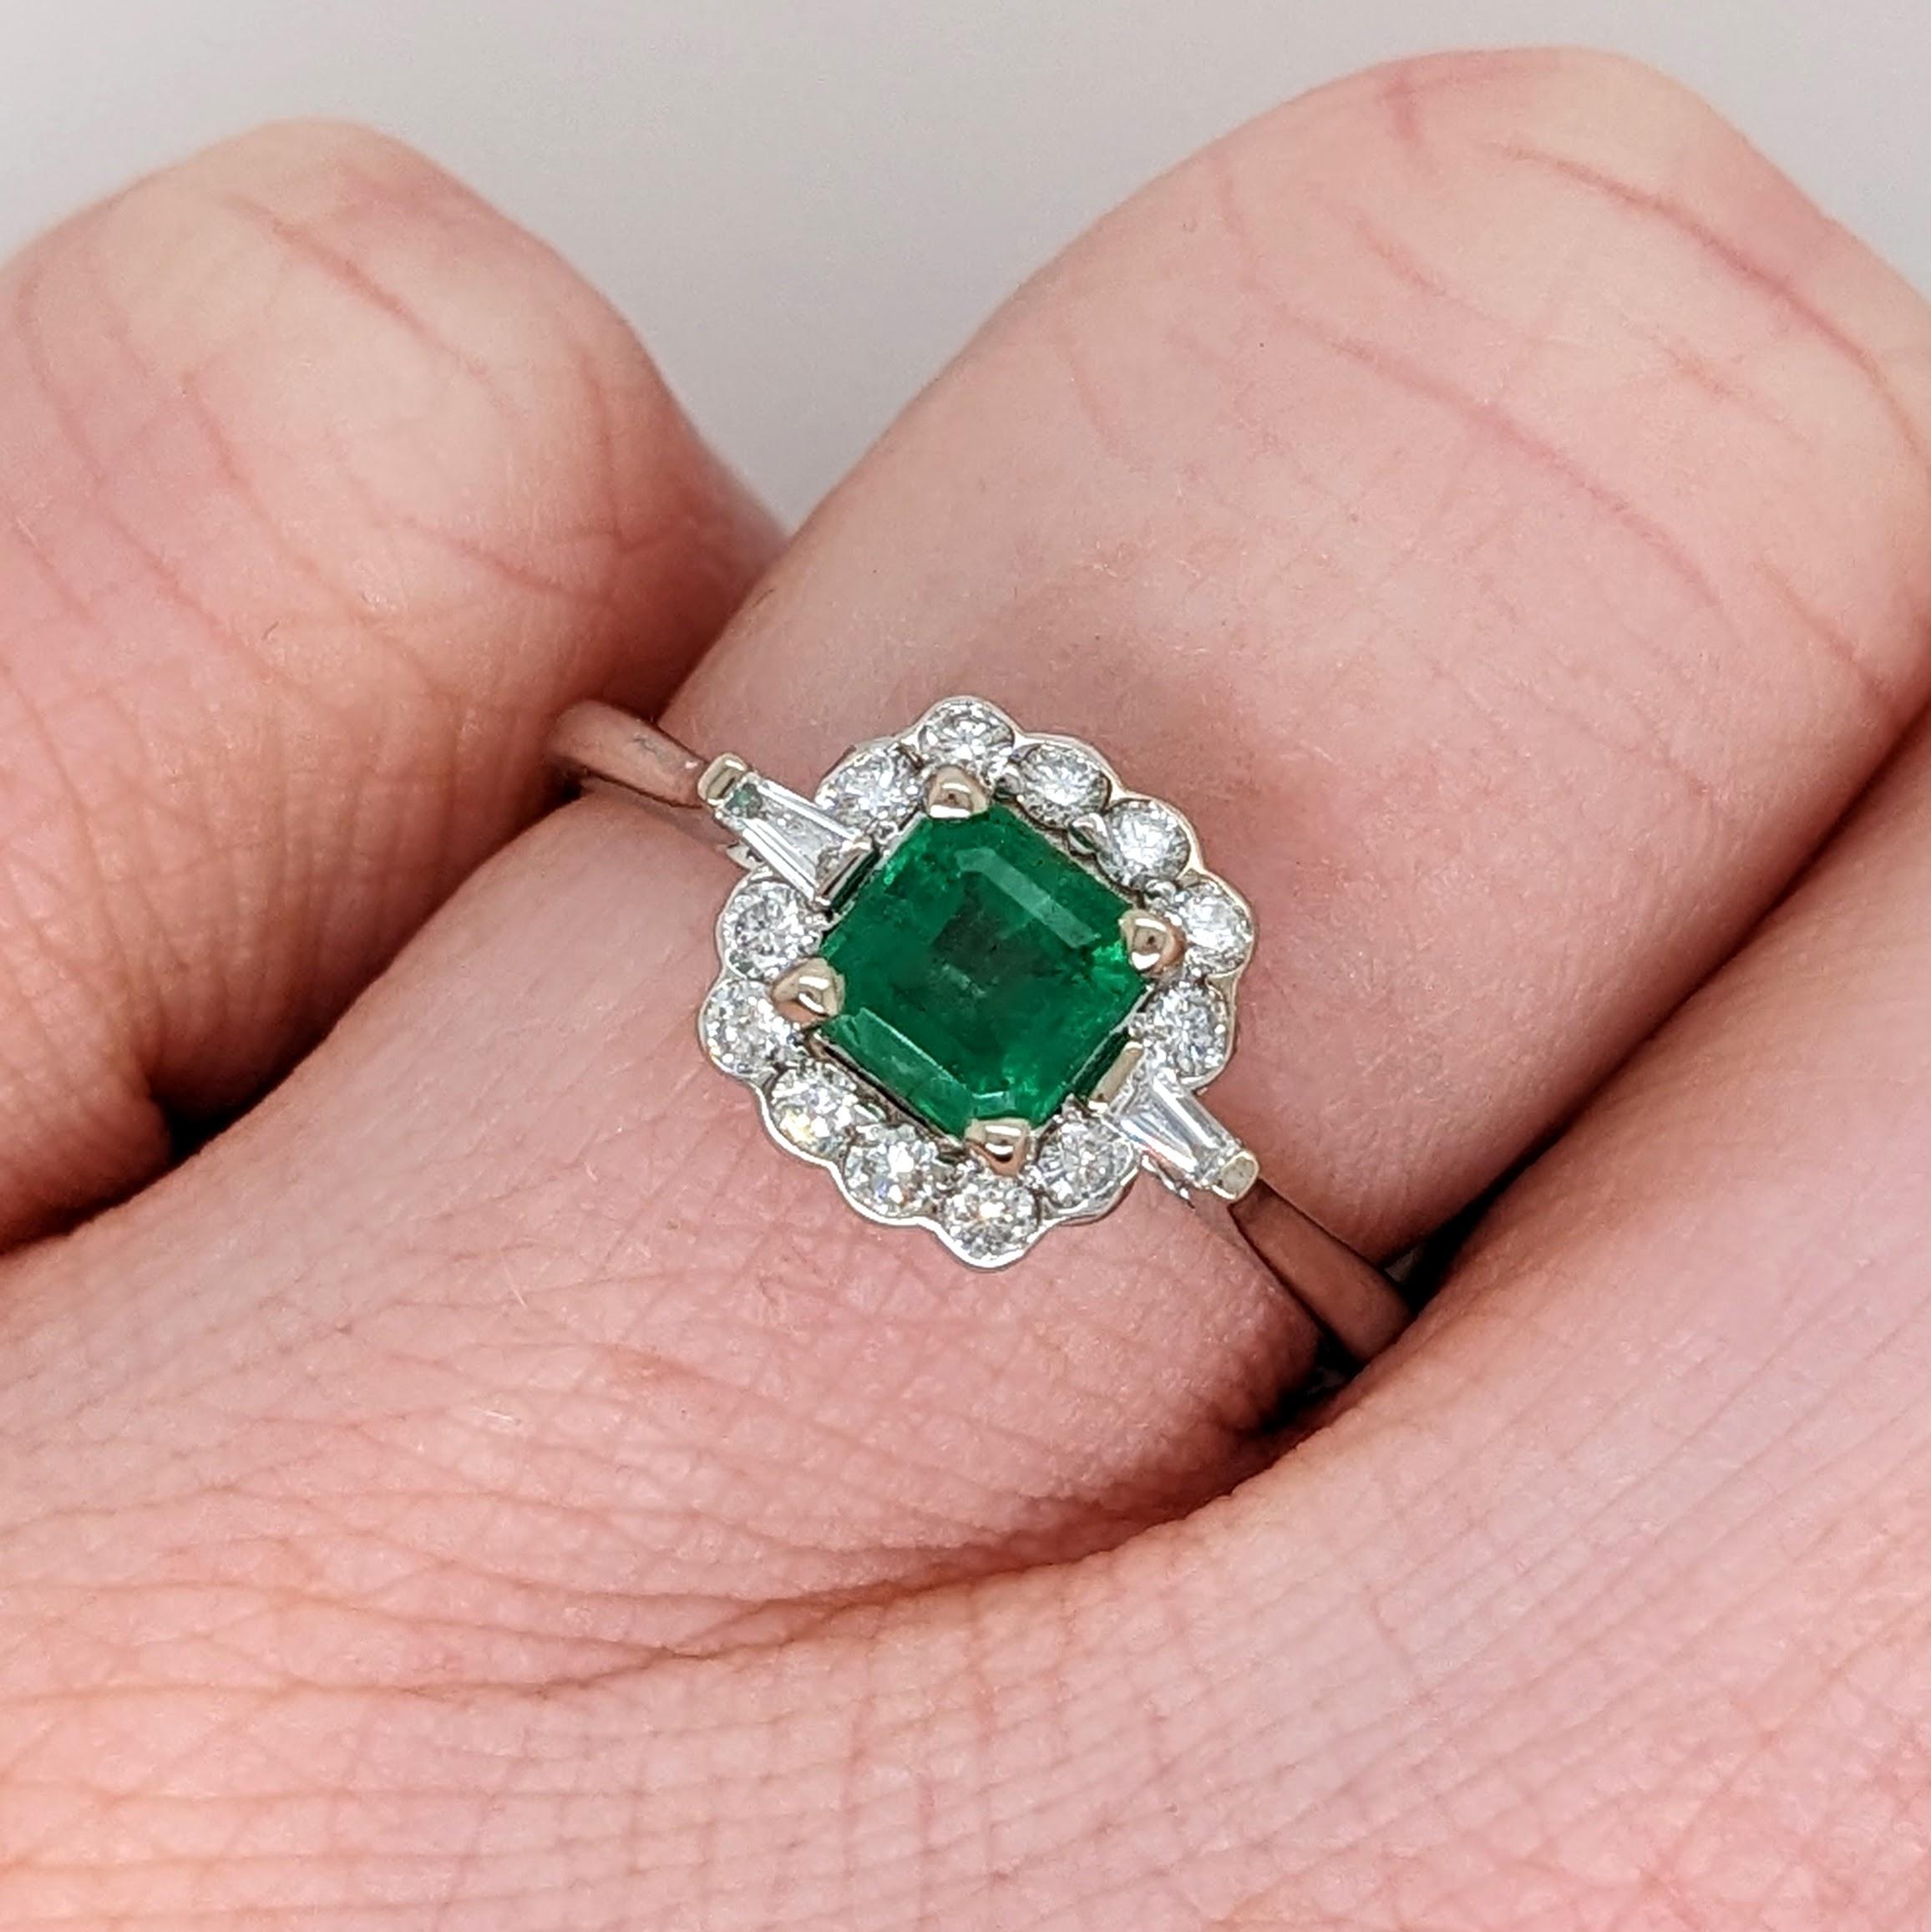 Emerald w Diamond Halo & Tapered Baguette Accents in 14K Gold Emerald Cut 5mm 2